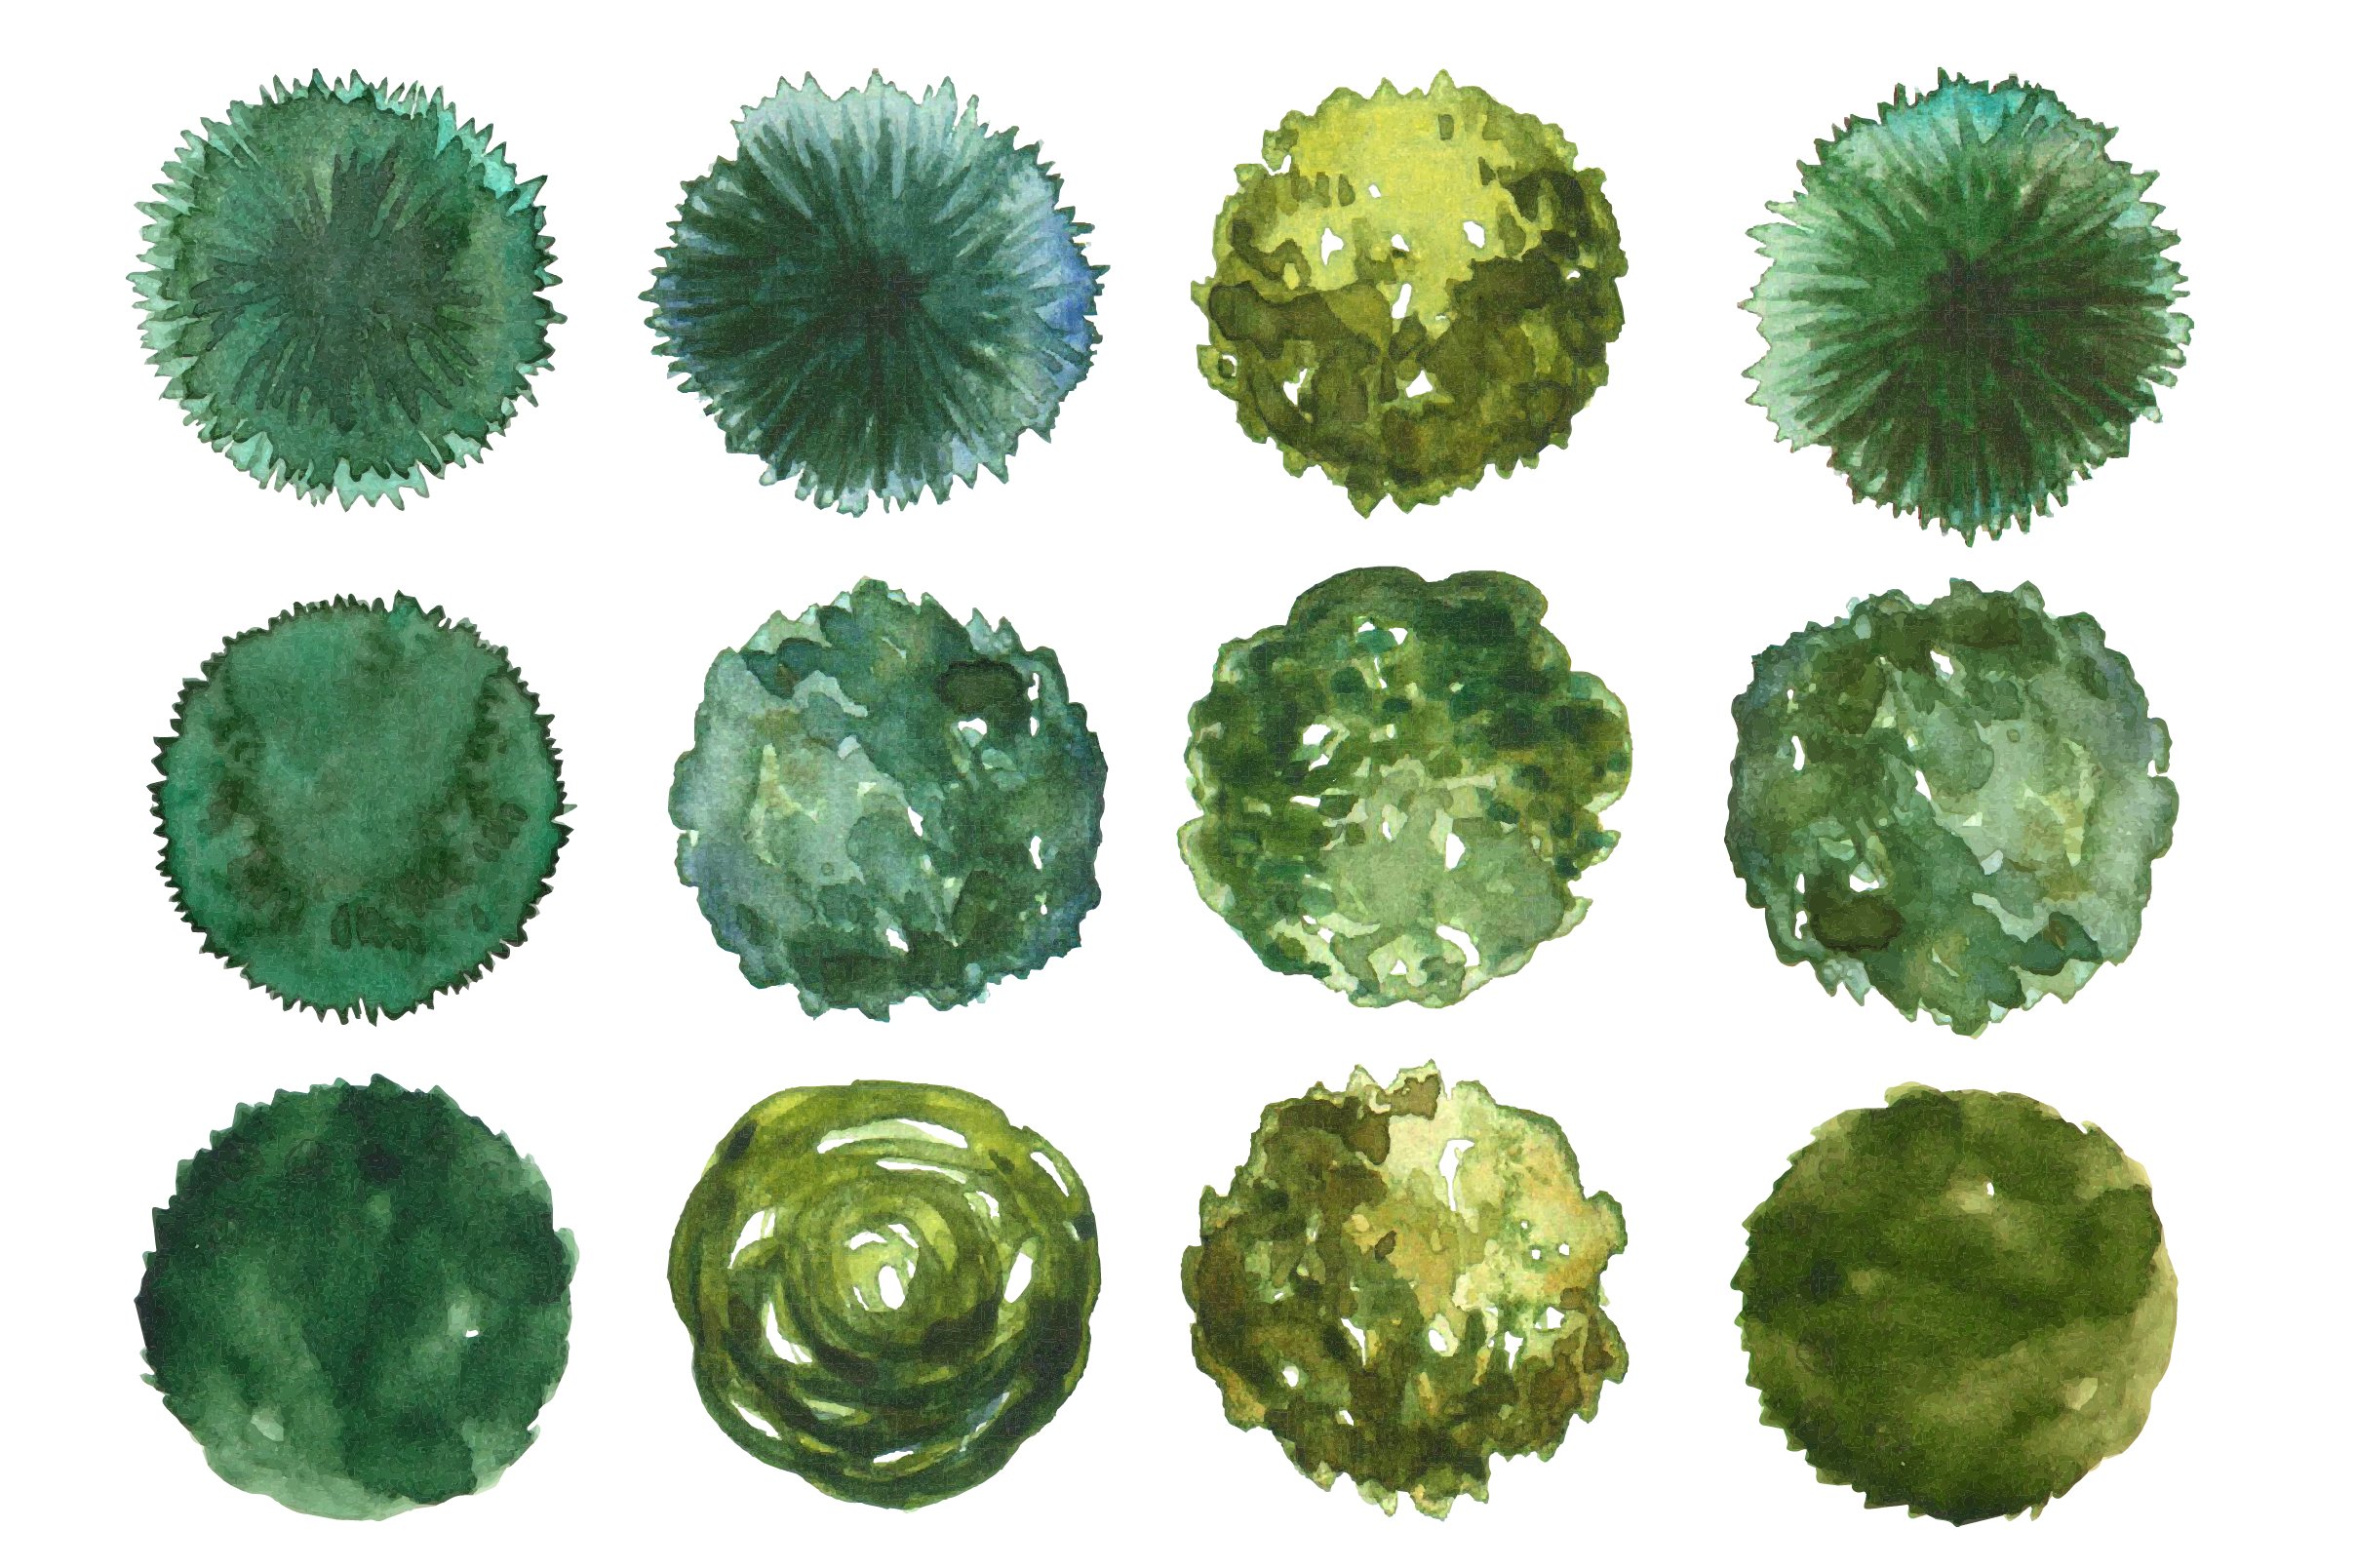 Bunch of different green objects on a white background.